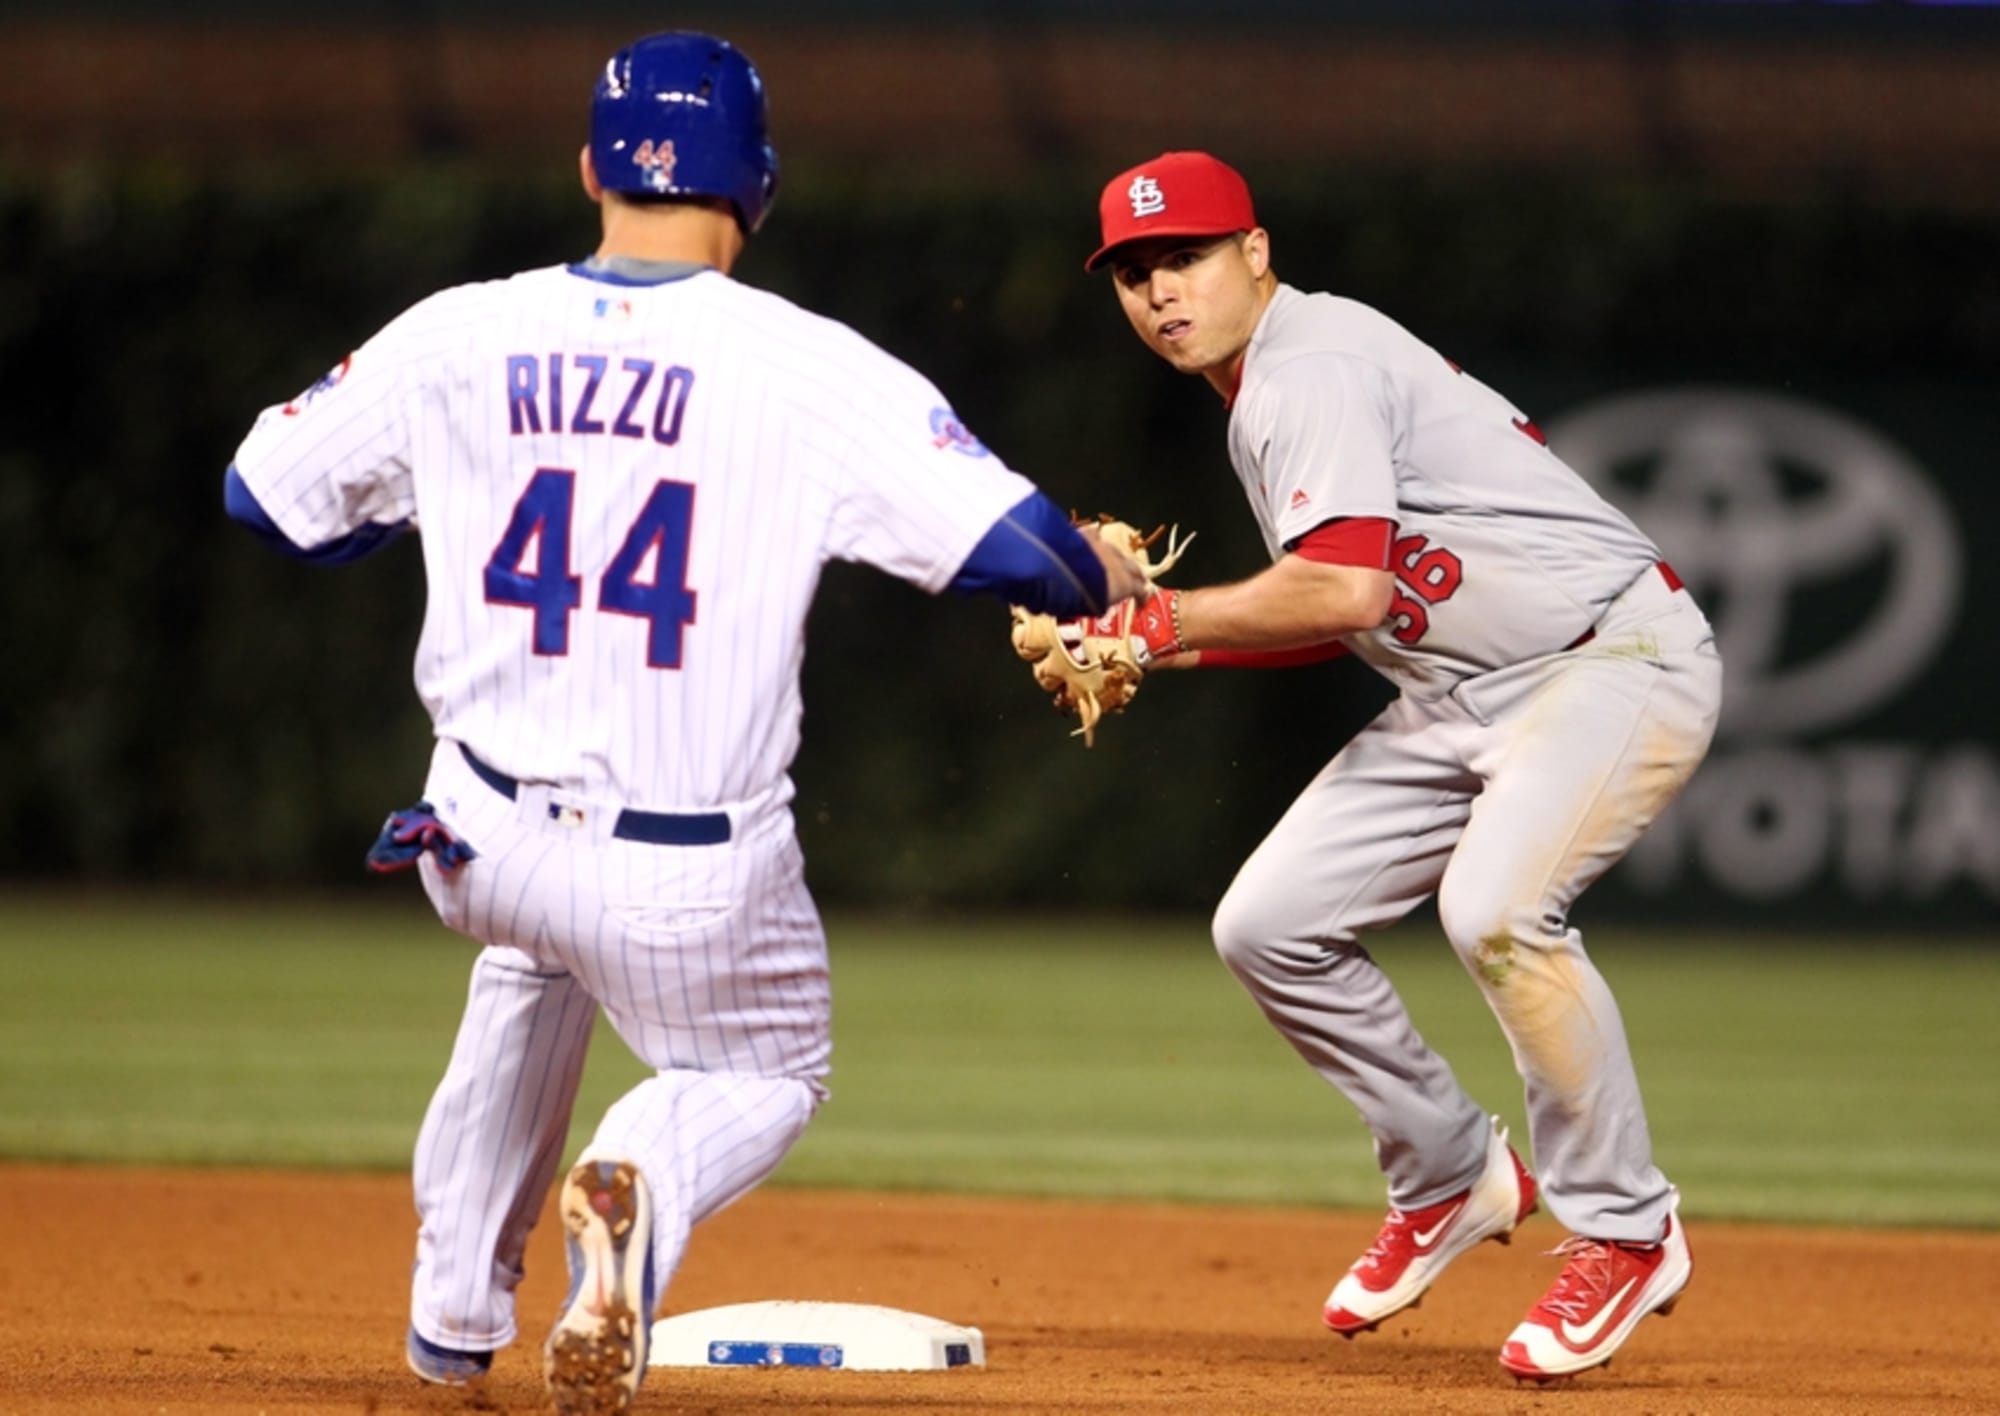 Chicago Cubs continue to struggle with runners on in 4-3 series loss